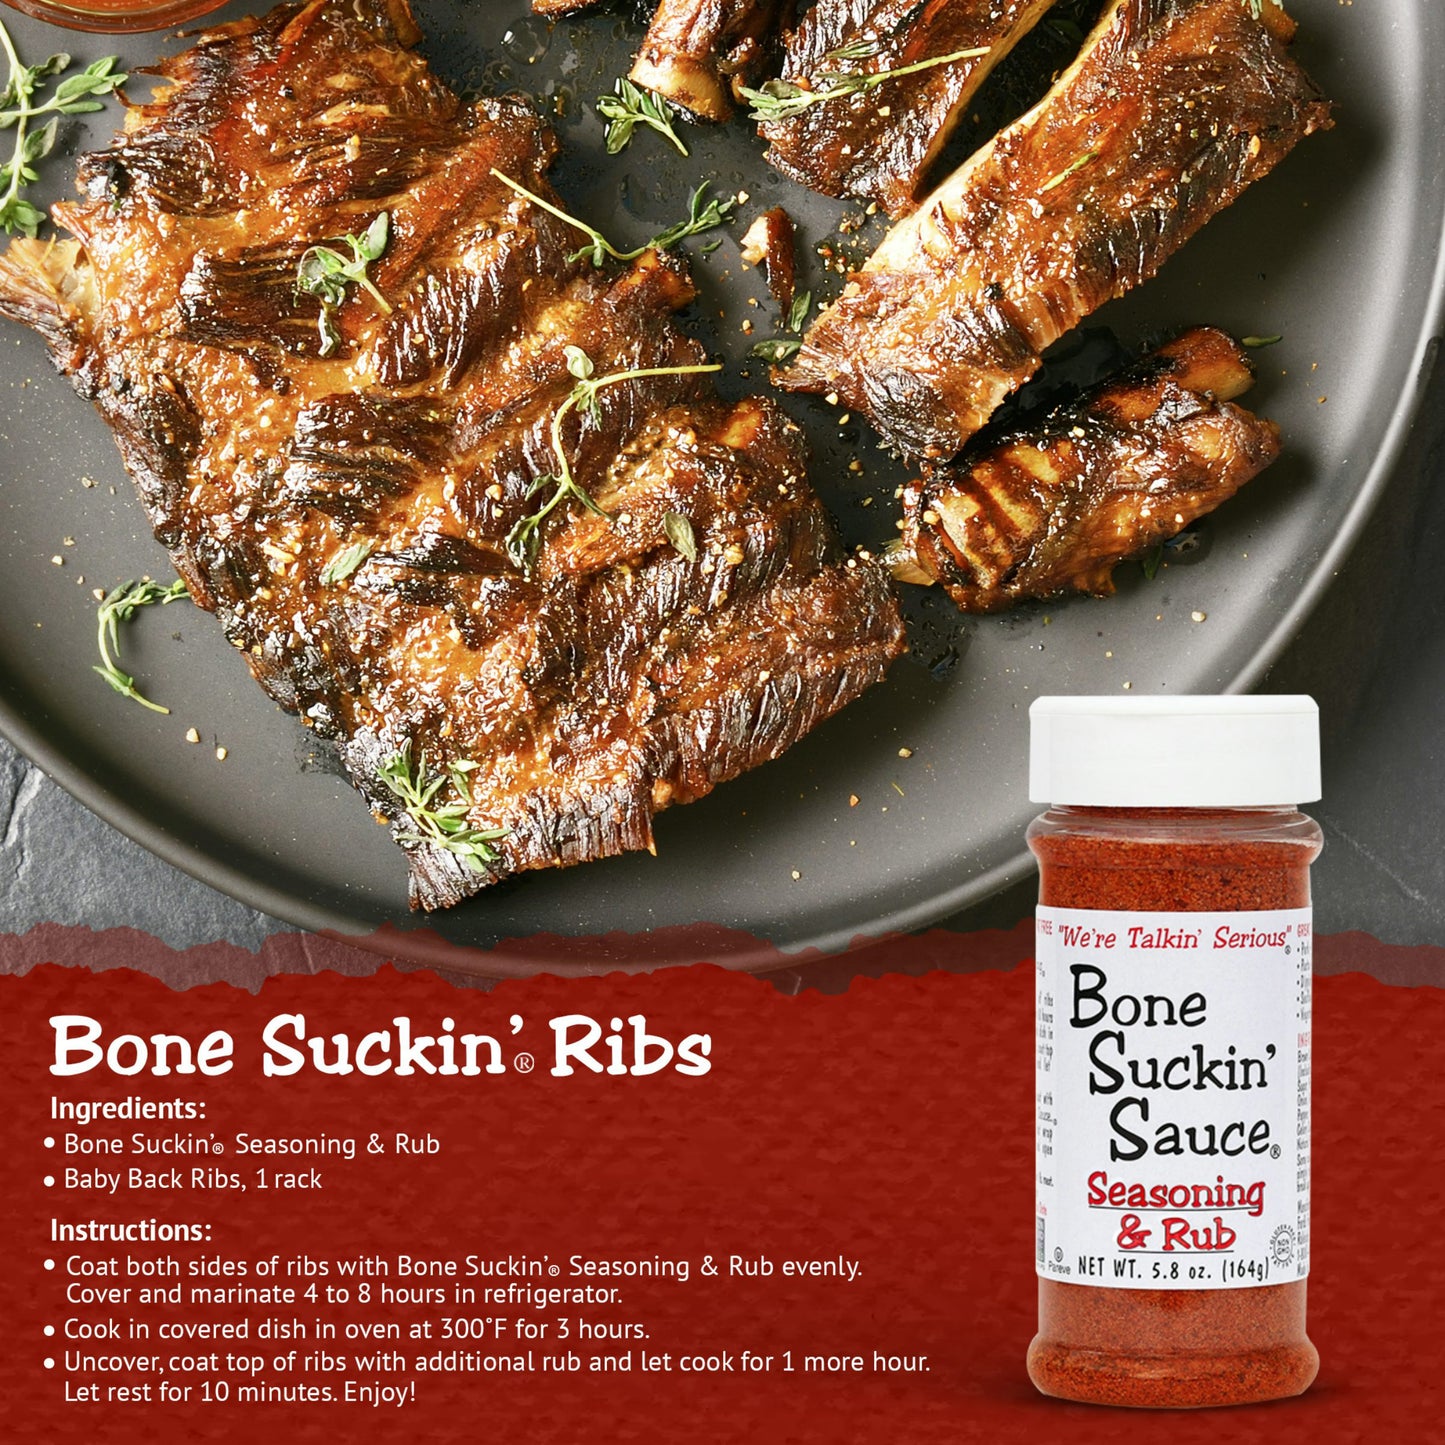 Bone Suckin' Ribs Recipe. Ingredients: Bone Suckin' Seasoning & Rub. Baby Back Ribs, 1 rack. Instructions: Coat both sides of ribs with Bone Suckin' Seasoning & Rub evenly. Cover and marinate 4 to 8 hours in refrigerator. Cook in covered dish in oven at 300 F for 3 hours. Uncover, coat top of ribs with additional rub and let cook for 1 more hour. Let rest for 10 minutes. Enjoy! Optional: For wet ribs, during last hour coat with favorite flavor of Bone Suckin' Sauce.